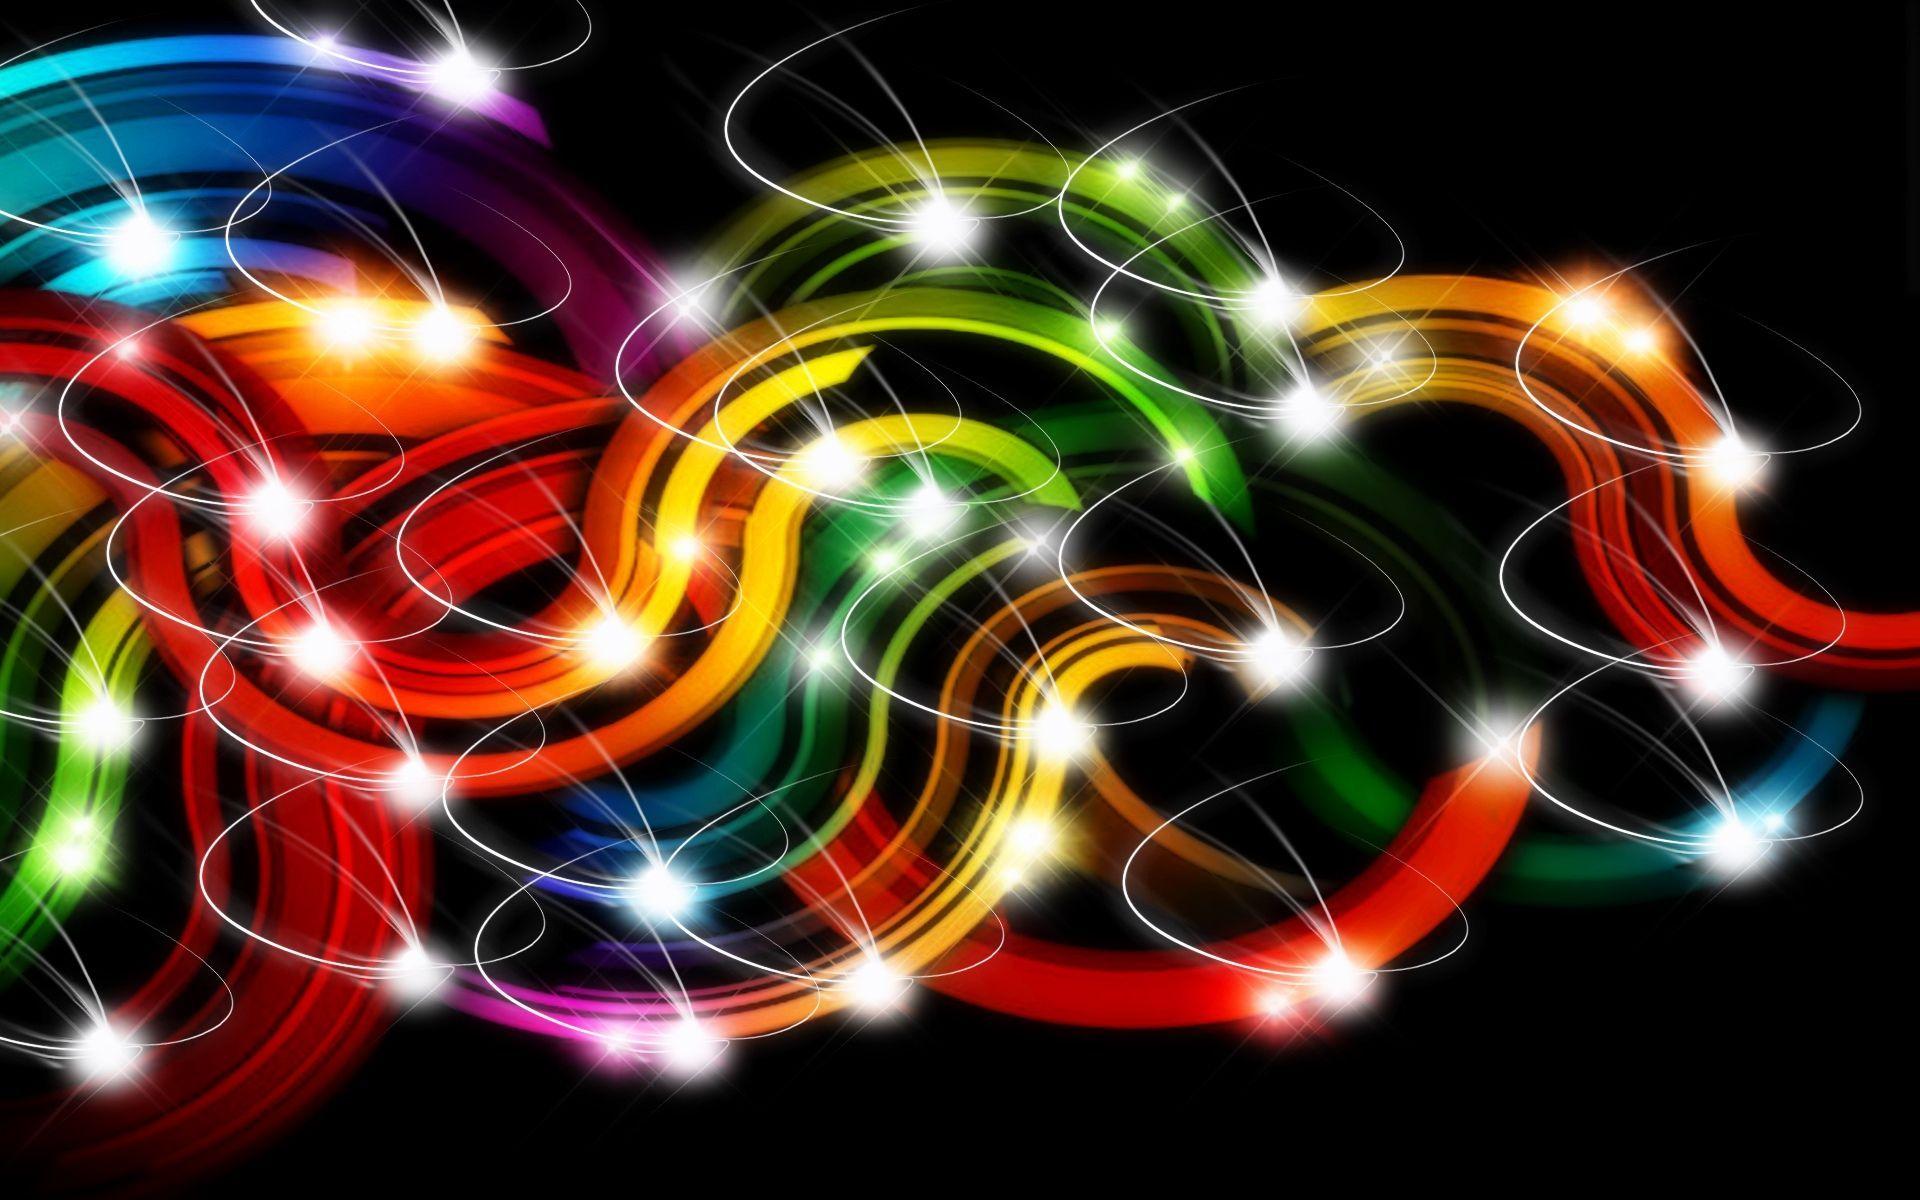 Wallpaper.wiki Colorful 3D Abstract Wallpaper PIC WPD0014495